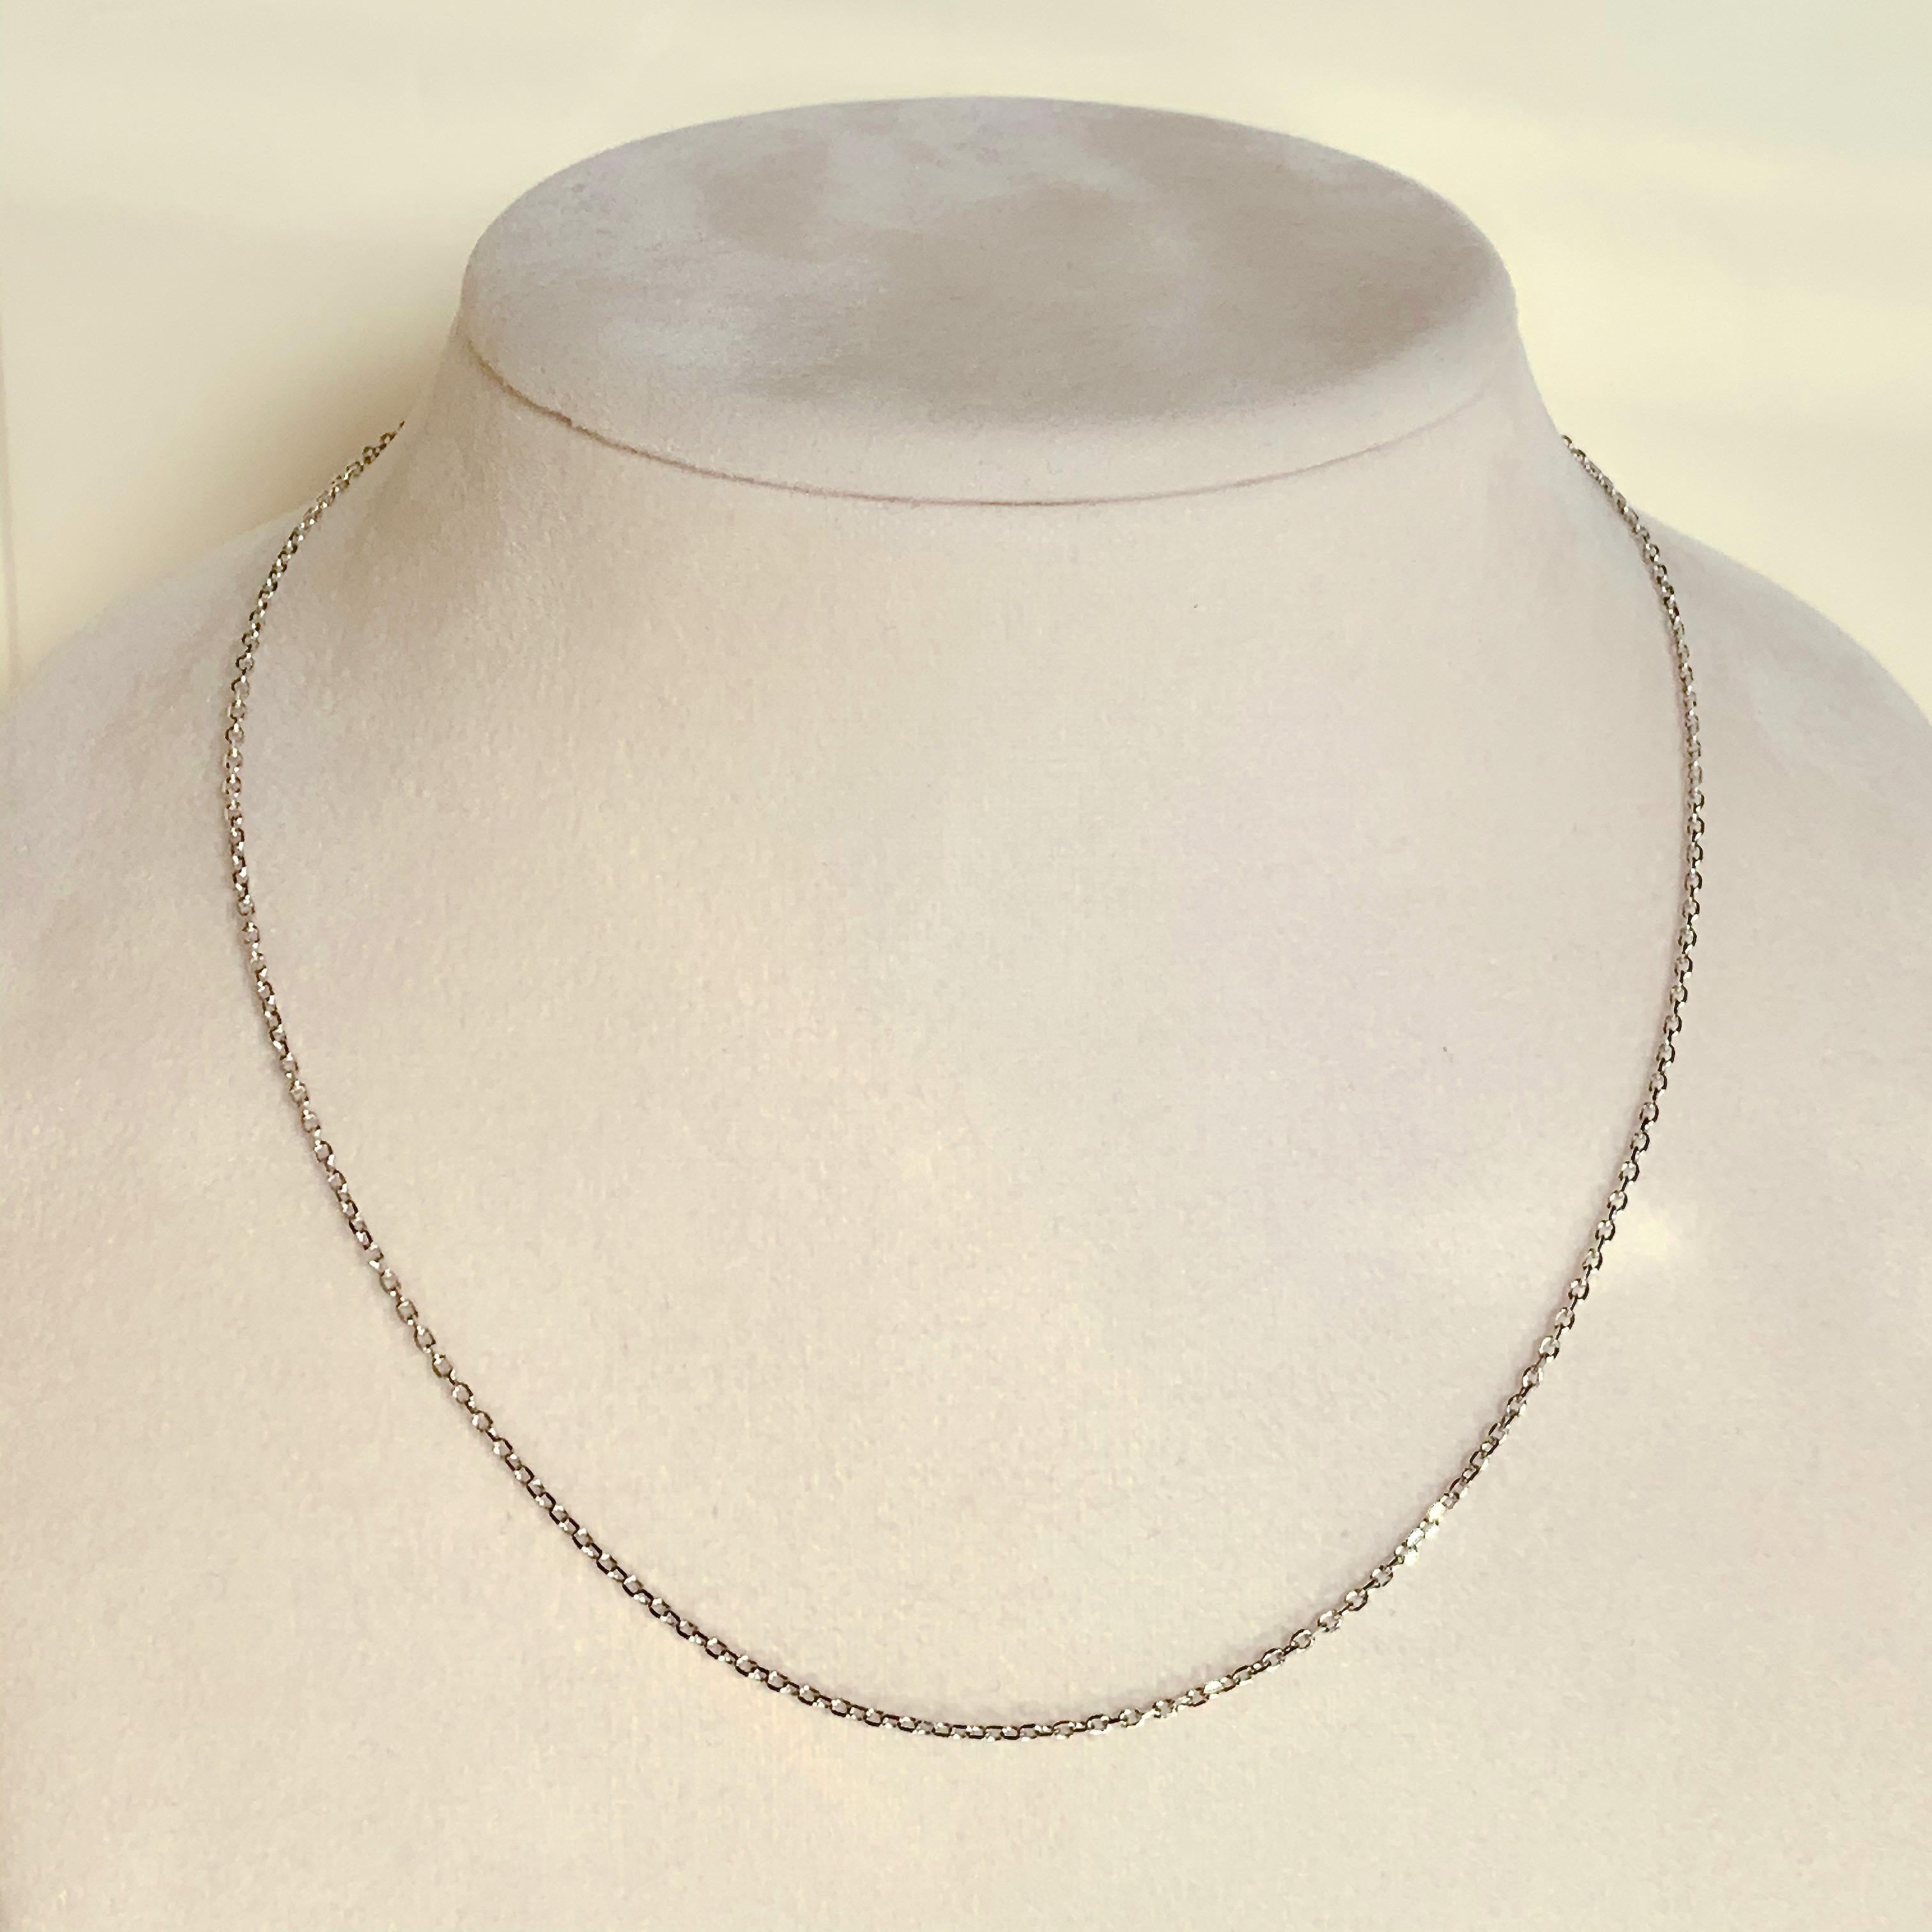 Women's or Men's 18 Karat Solid White Gold Link Chain Necklace For Sale